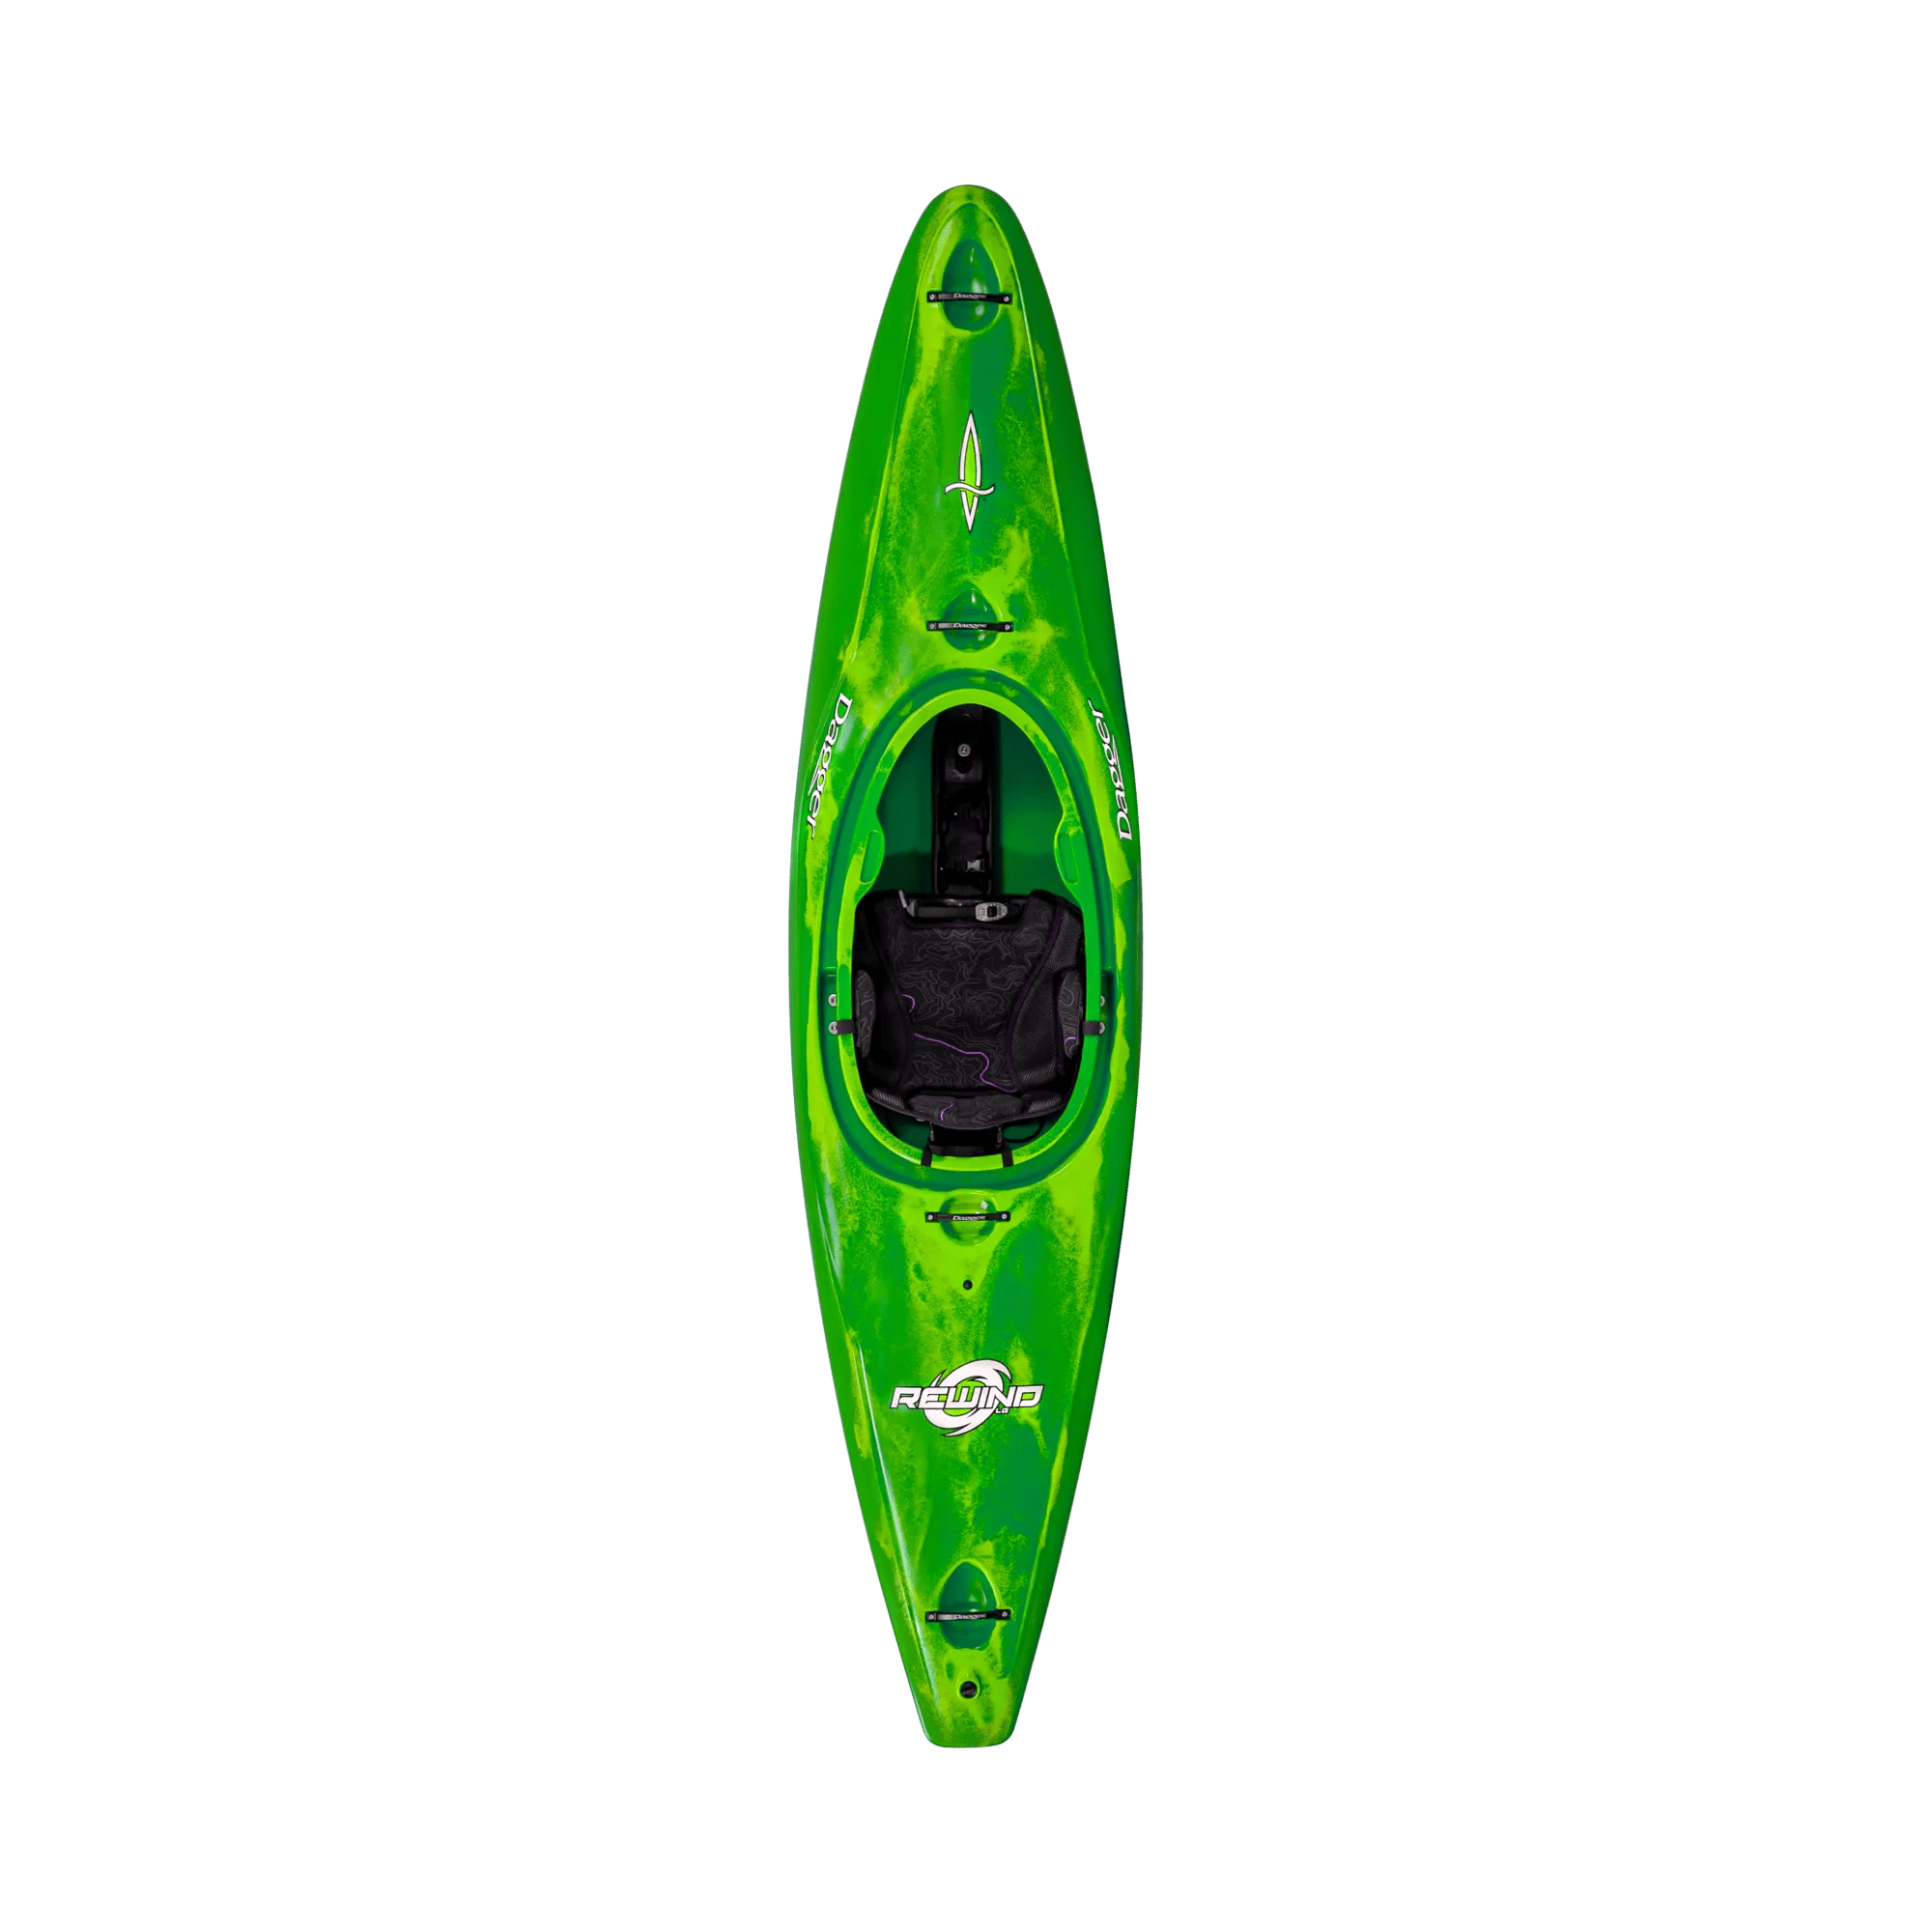 DAGGER - Rewind MD River Play Whitewater Kayak - Green - 9010344207 - TOP